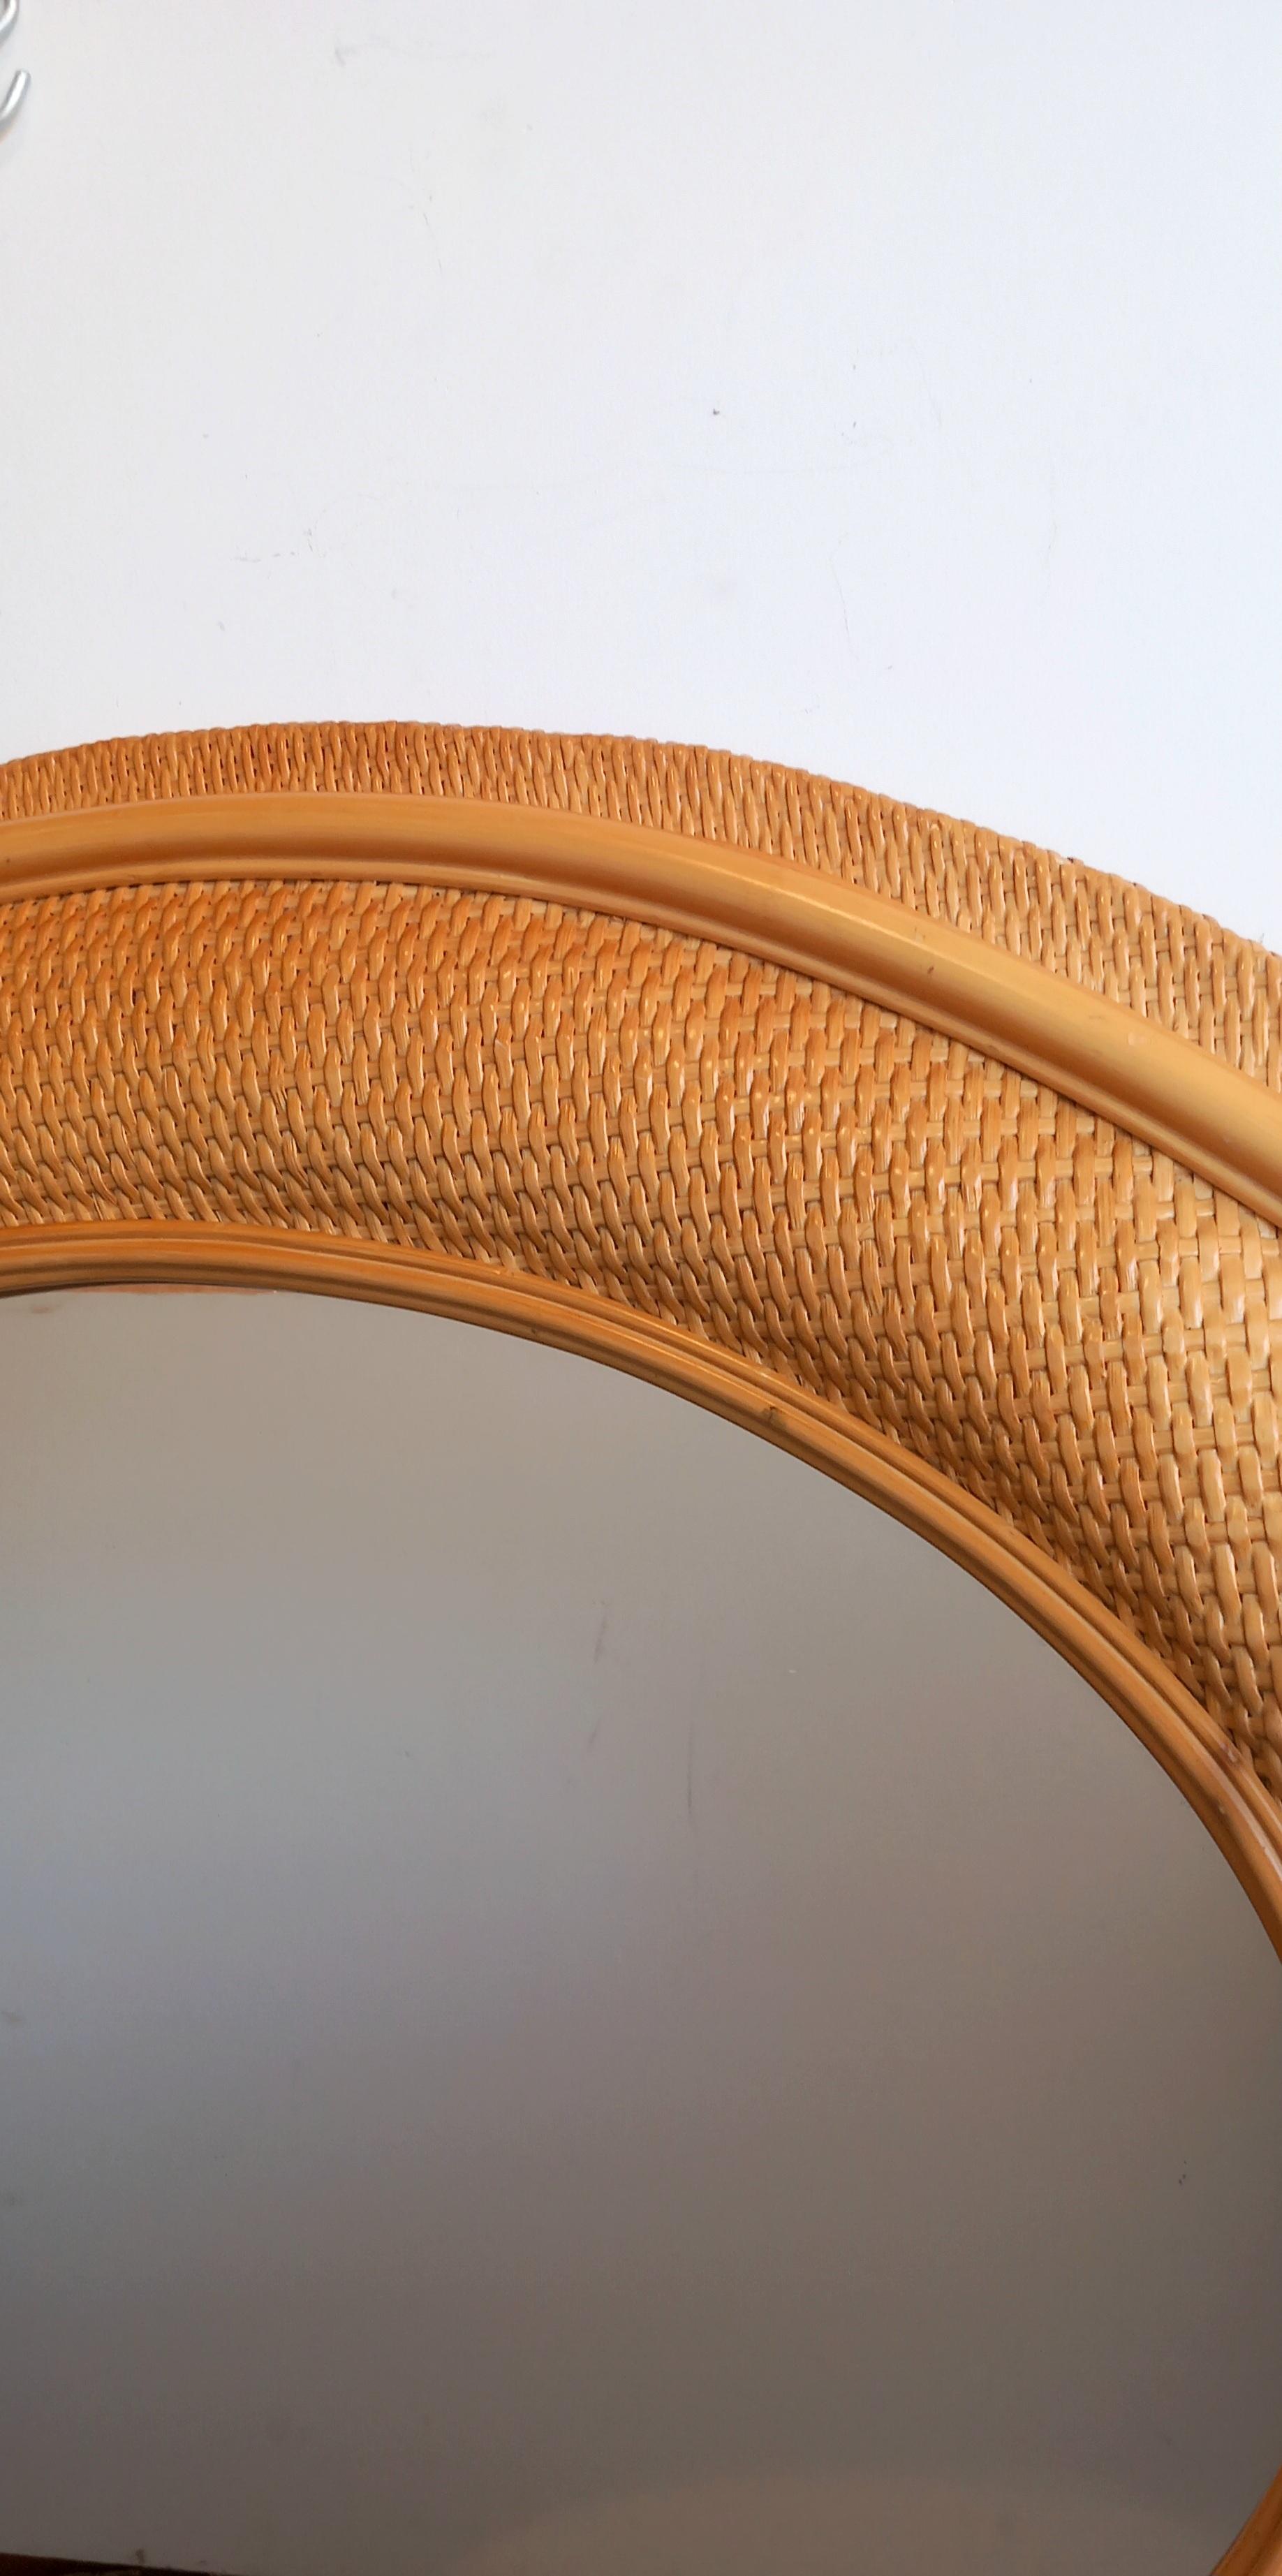 Italian Mirrors Rattan Rare Extra Large Oval  Mid-20th  Century  Vertical or Horizontal  For Sale